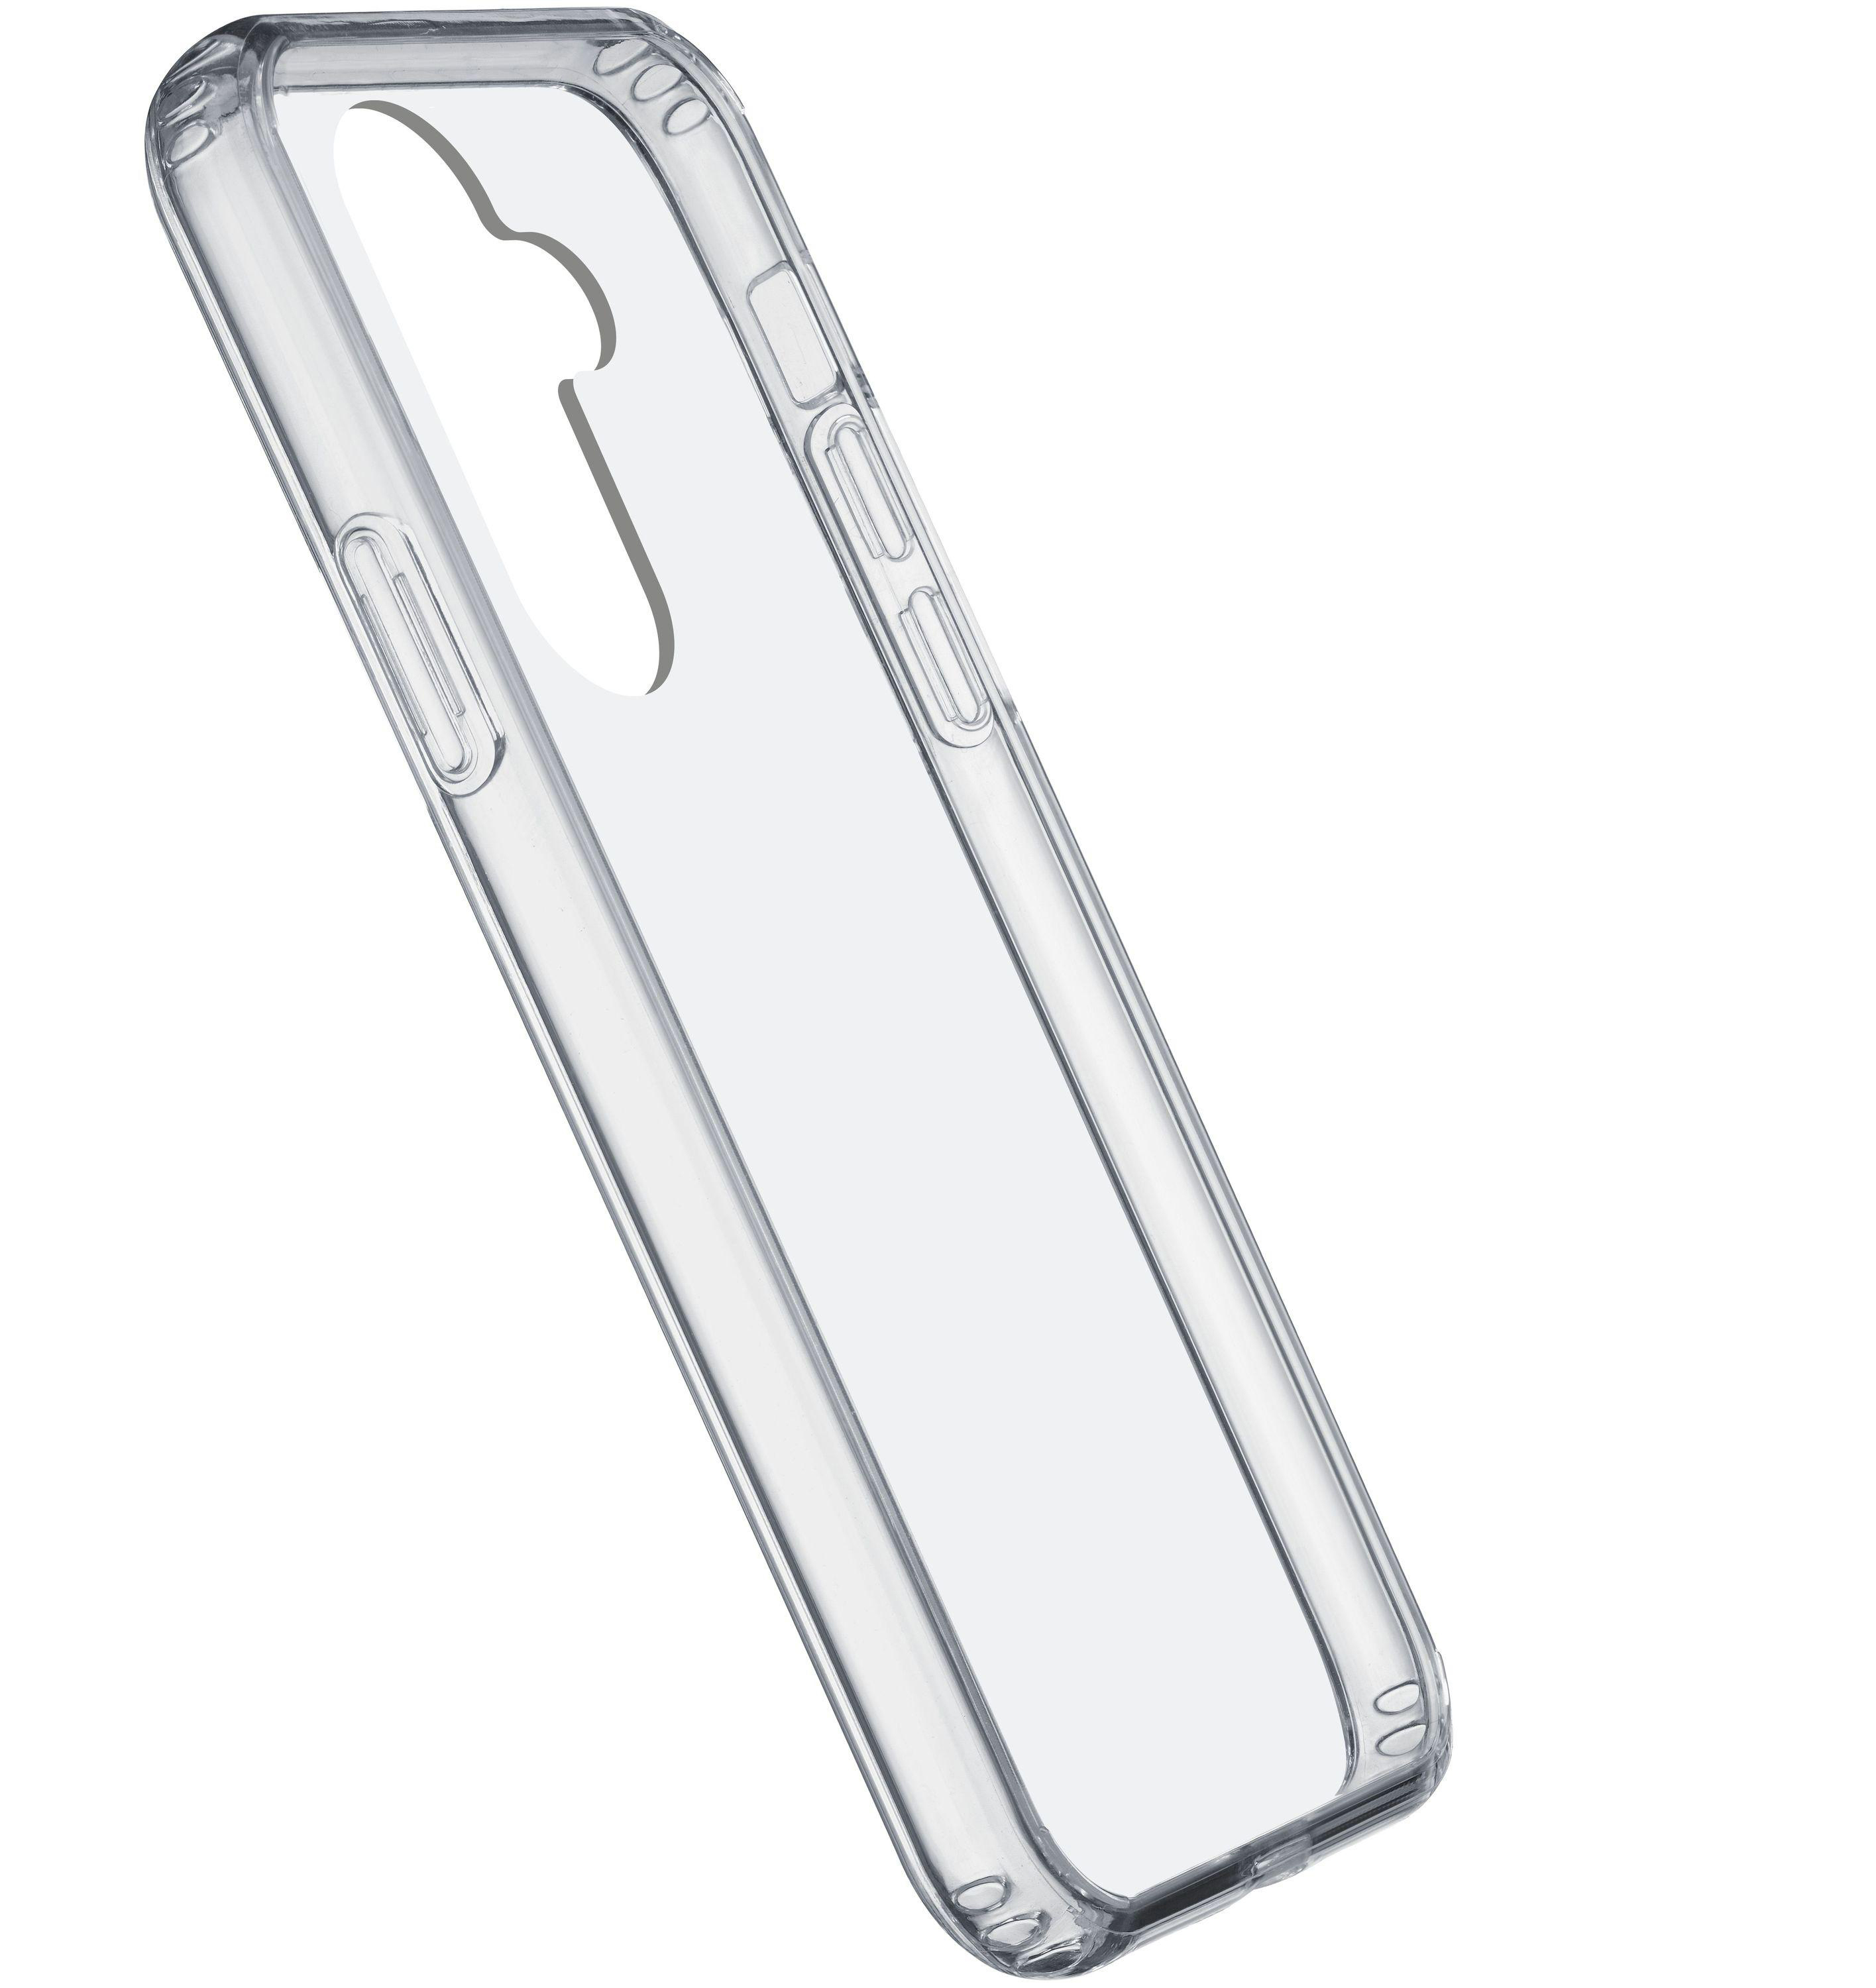 CELLULAR CLEARDUOGALA54T, Transparent Backcover, A54, Samsung, LINE Galaxy